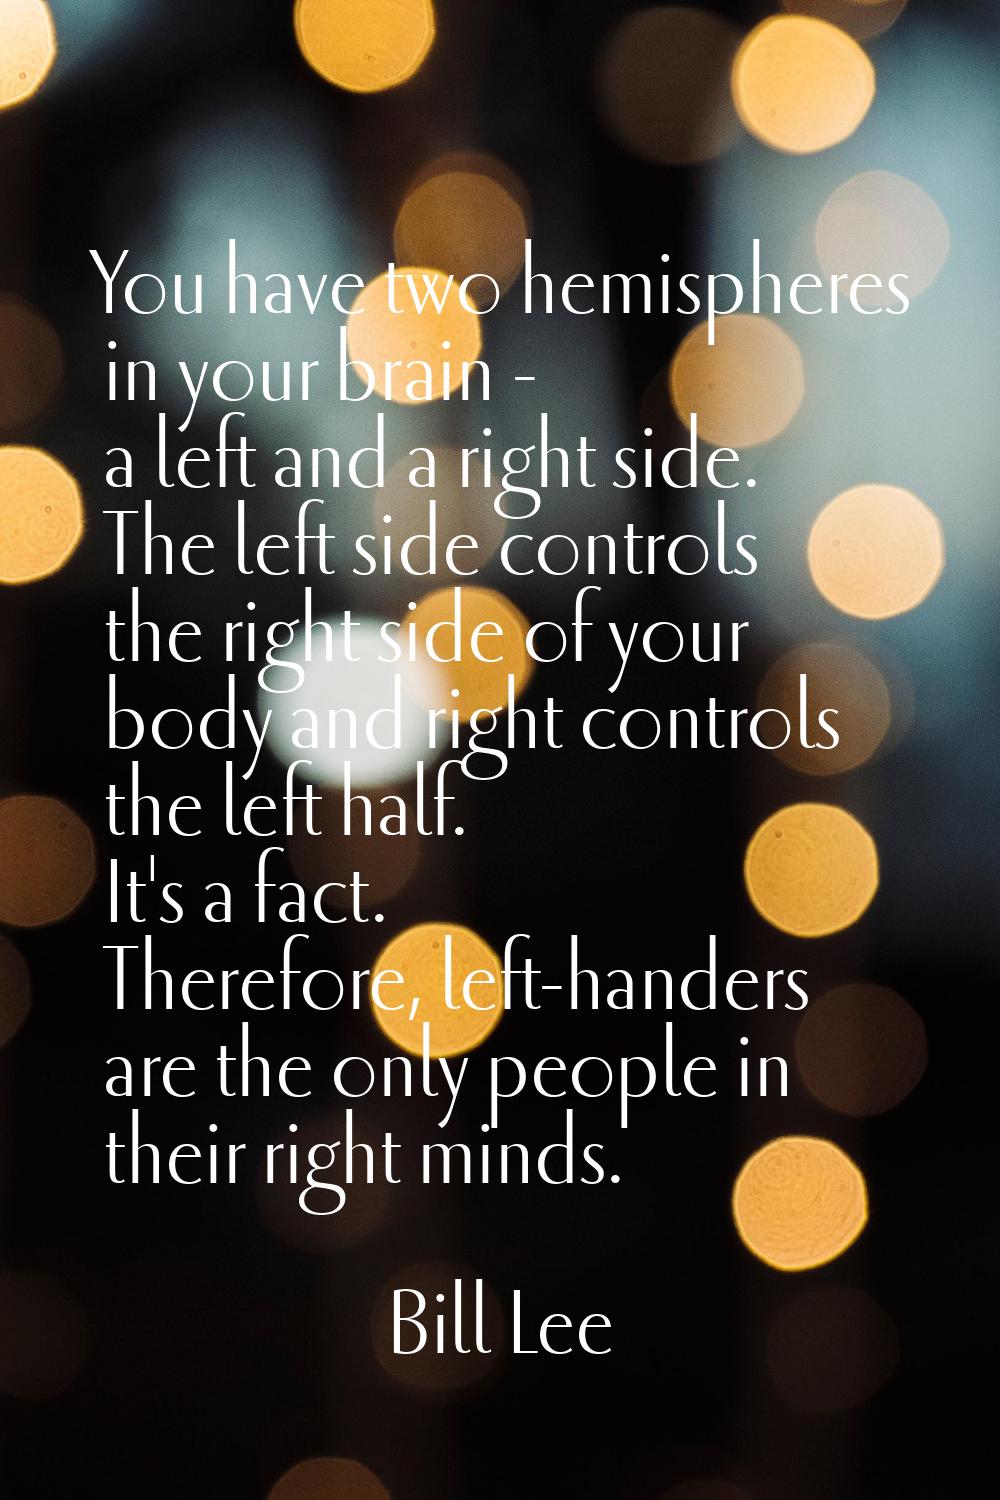 You have two hemispheres in your brain - a left and a right side. The left side controls the right 